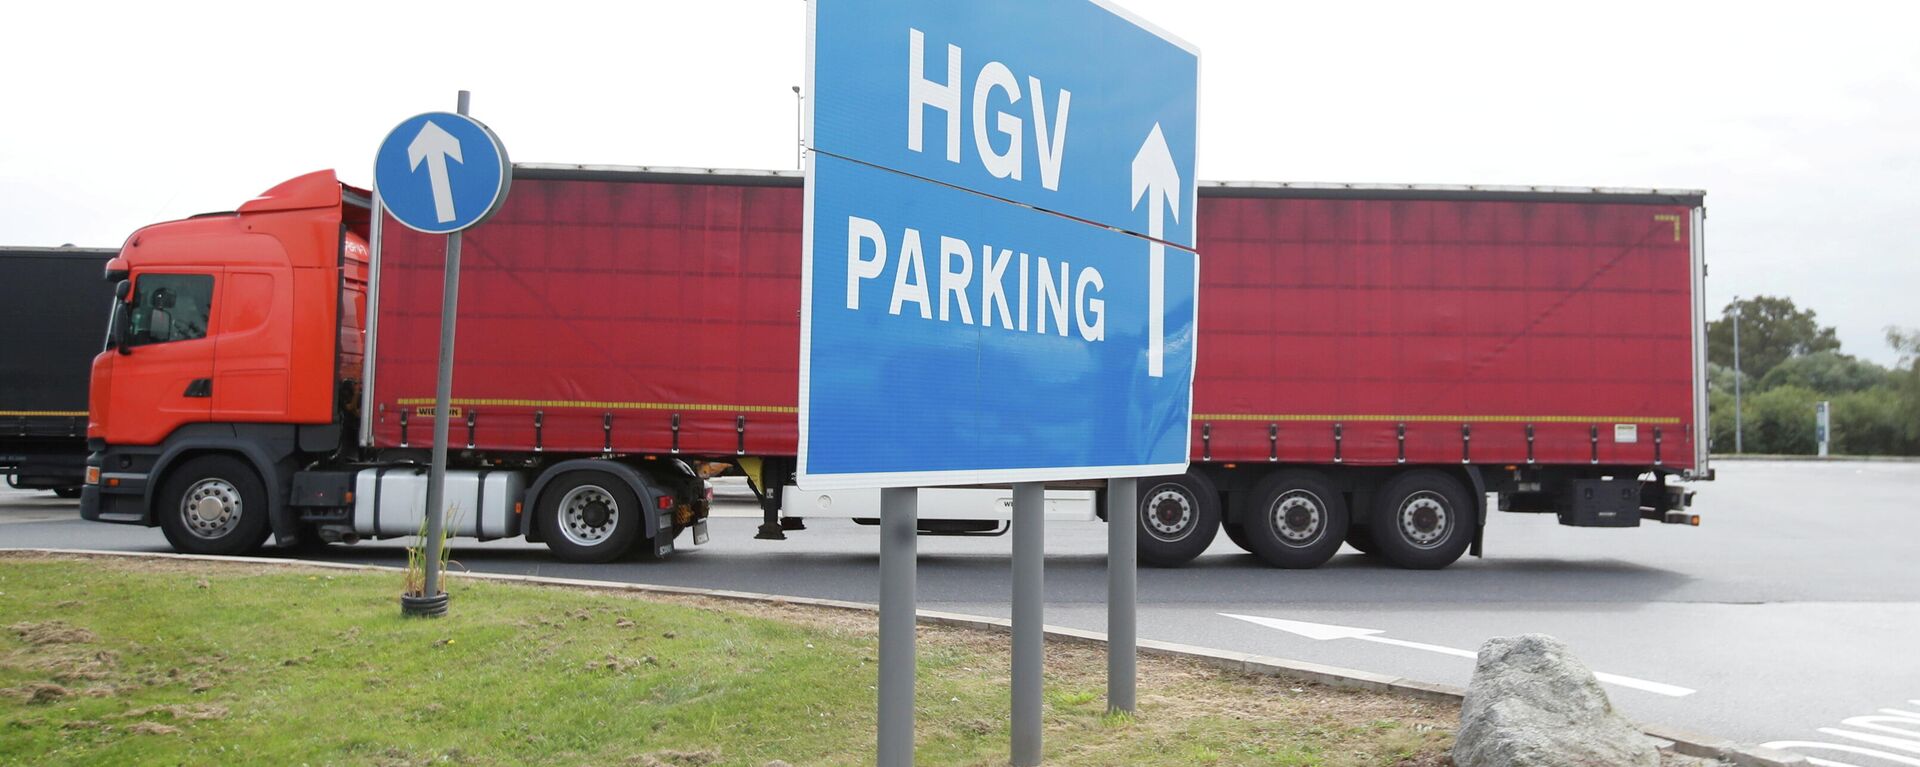 Lorries are seen at an HGV parking, at Cobham services on the M25 motorway, Cobham, Britain, August 31, 2021 - Sputnik International, 1920, 25.09.2021